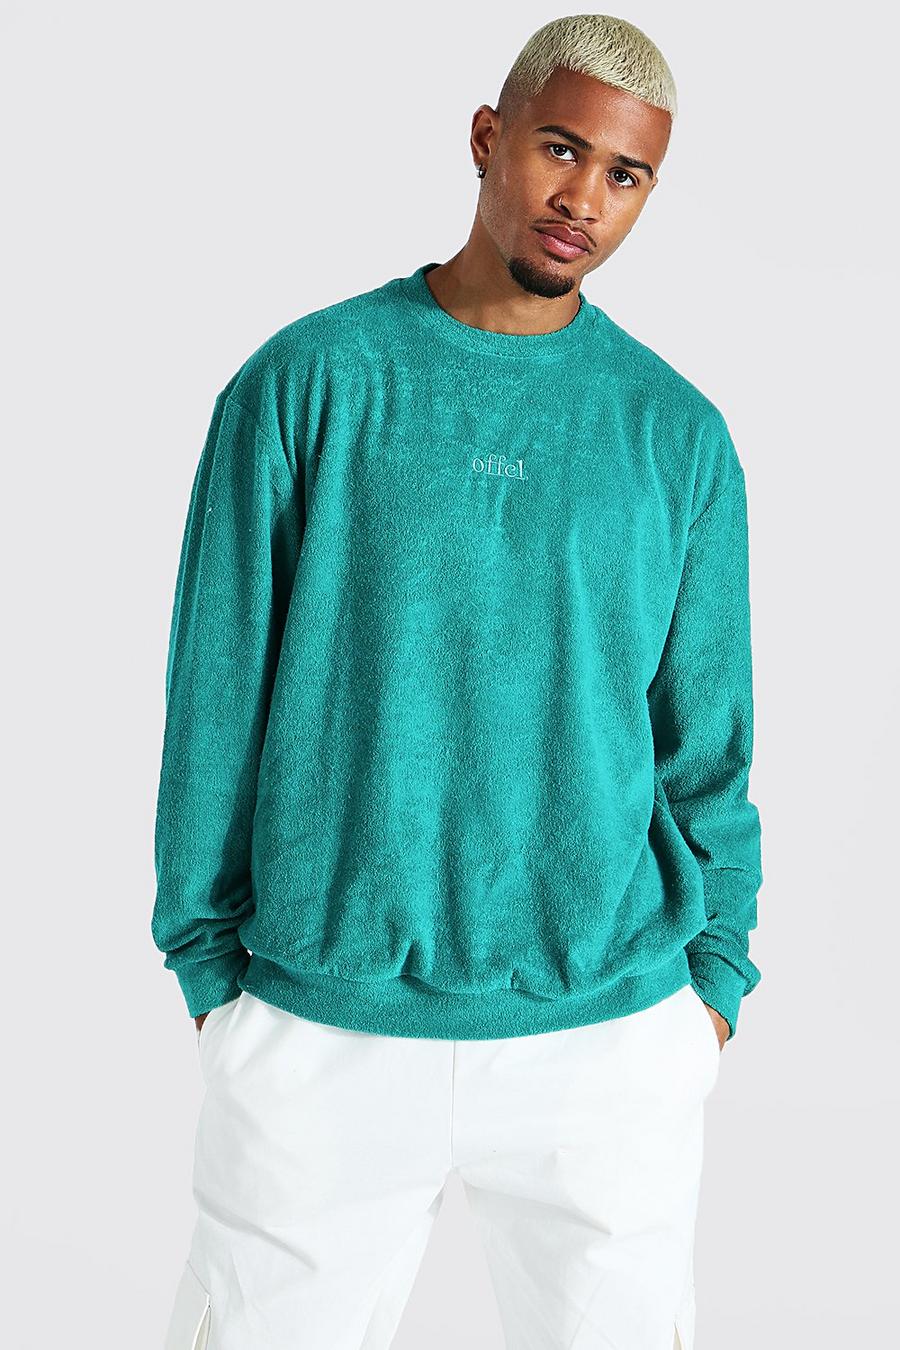 Teal Oversized Offcl Towelling Sweatshirt image number 1